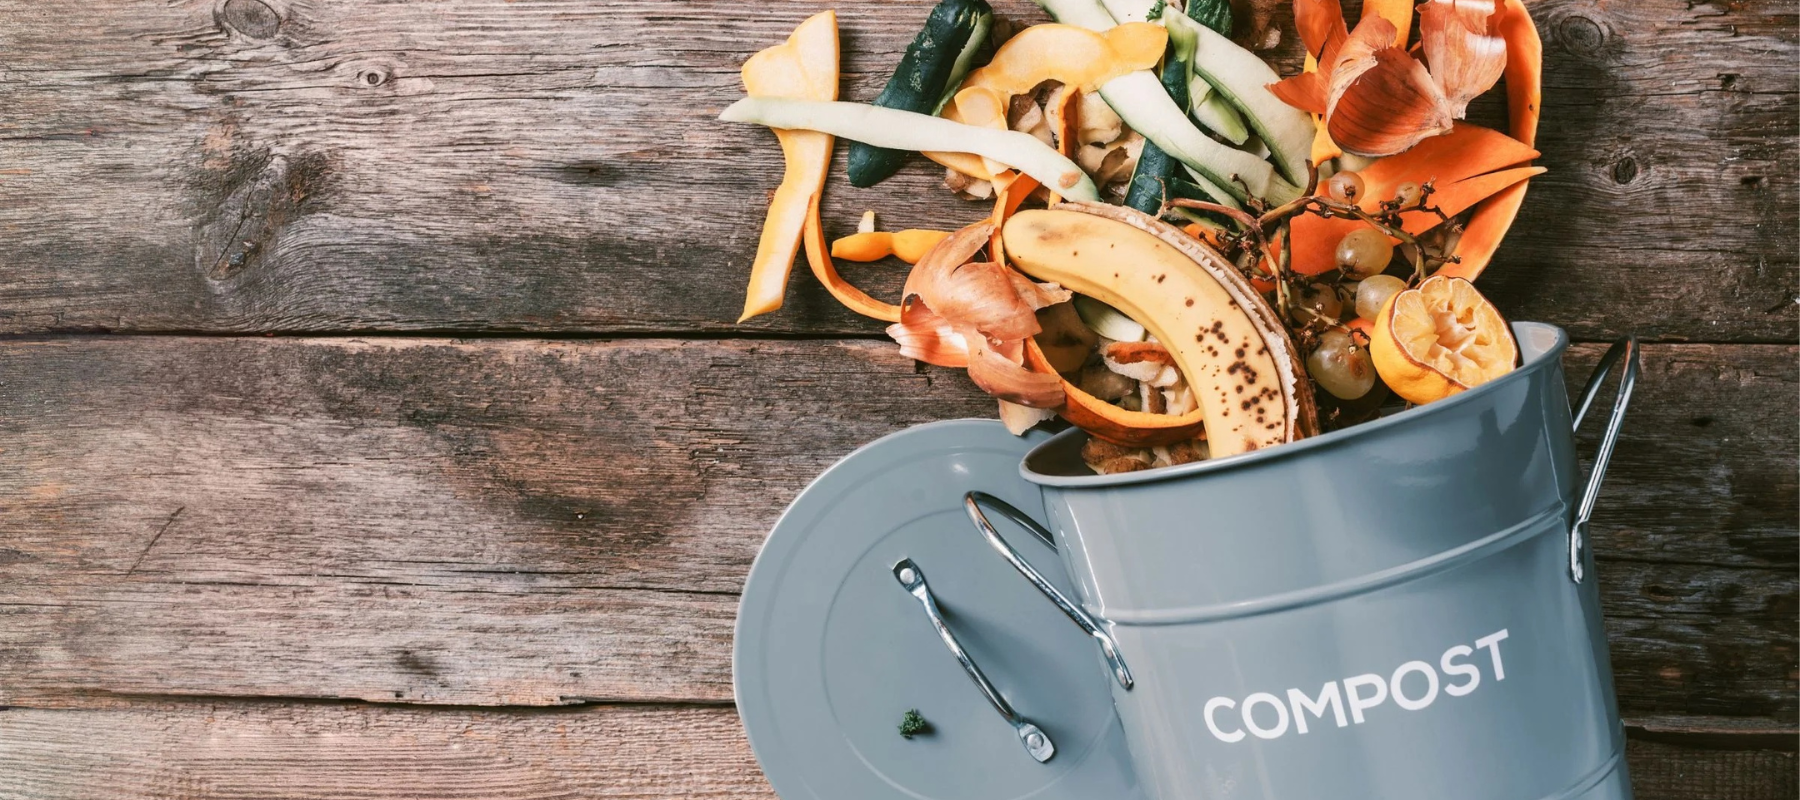 What to exclude from your compost